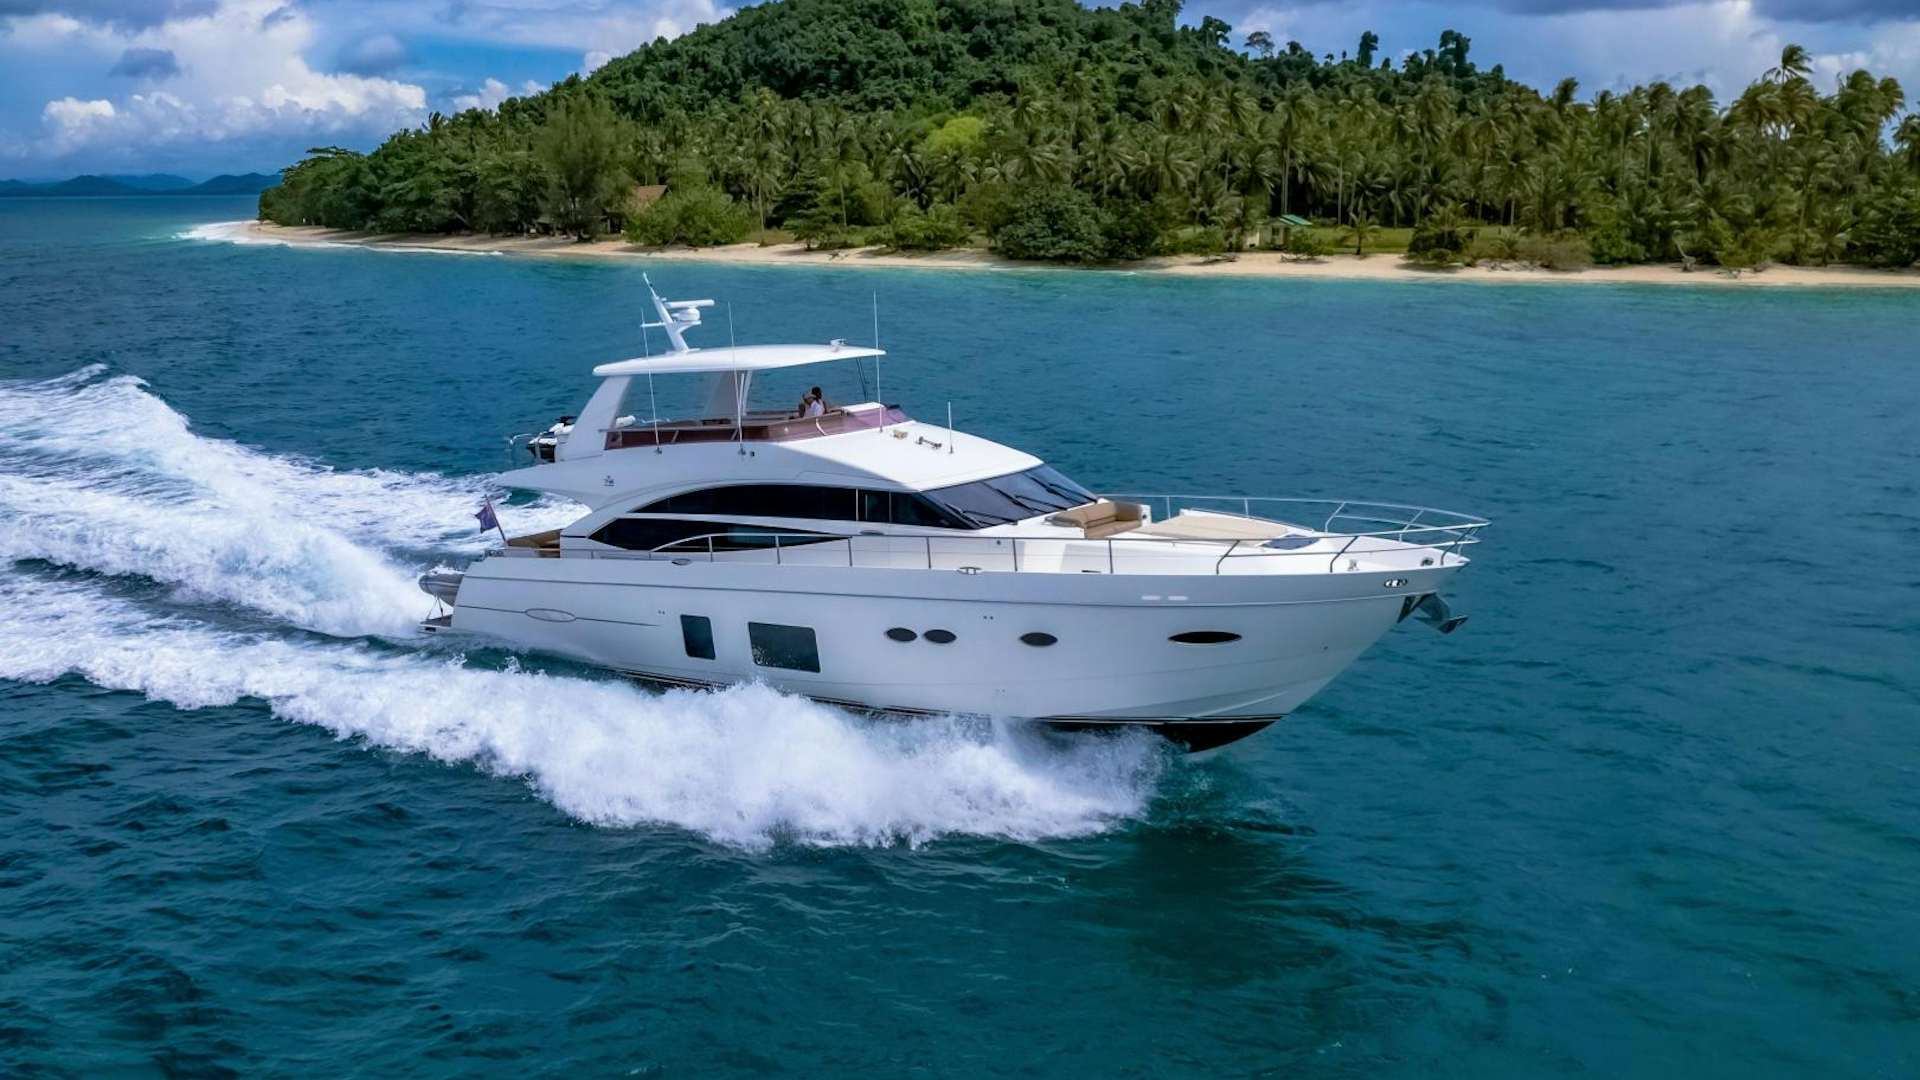 Watch Video for GIFZY Yacht for Sale